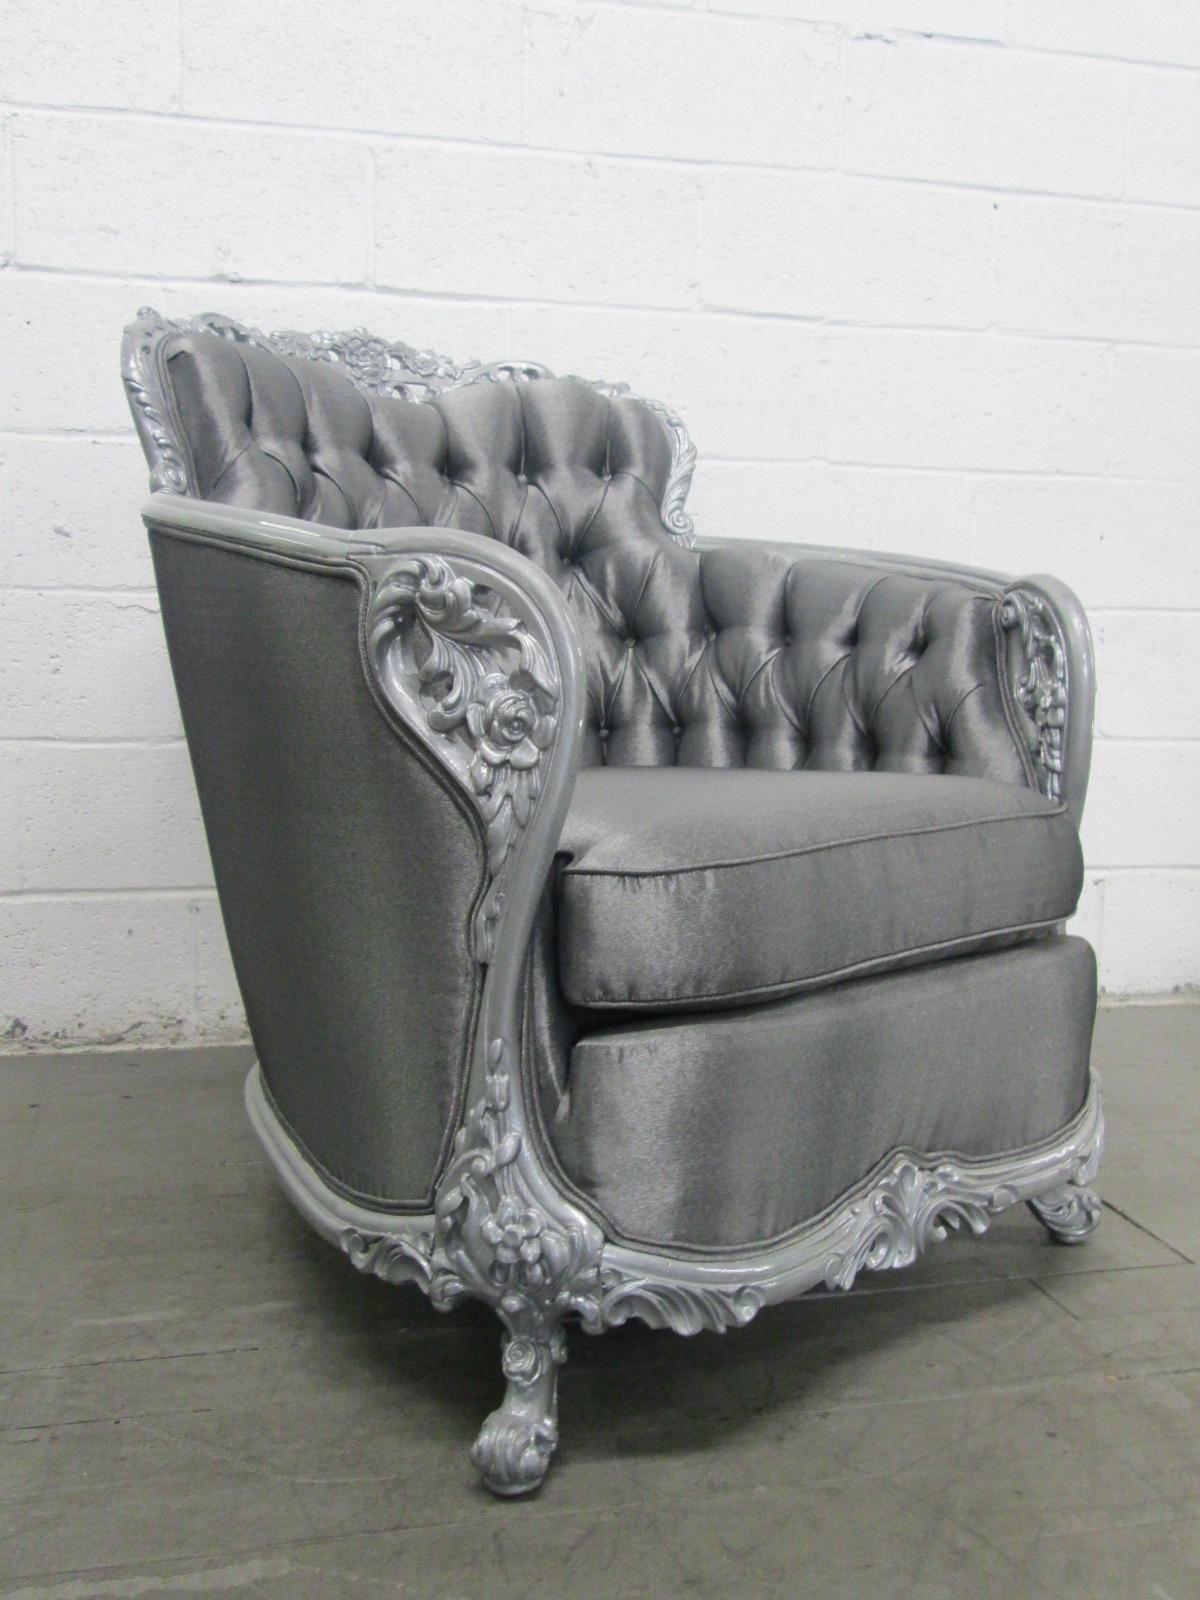 Beautiful, antique style carved, tufted chair. Newly upholstered in silver-gray sheen fabric. Frame has a dark silver painted finish.